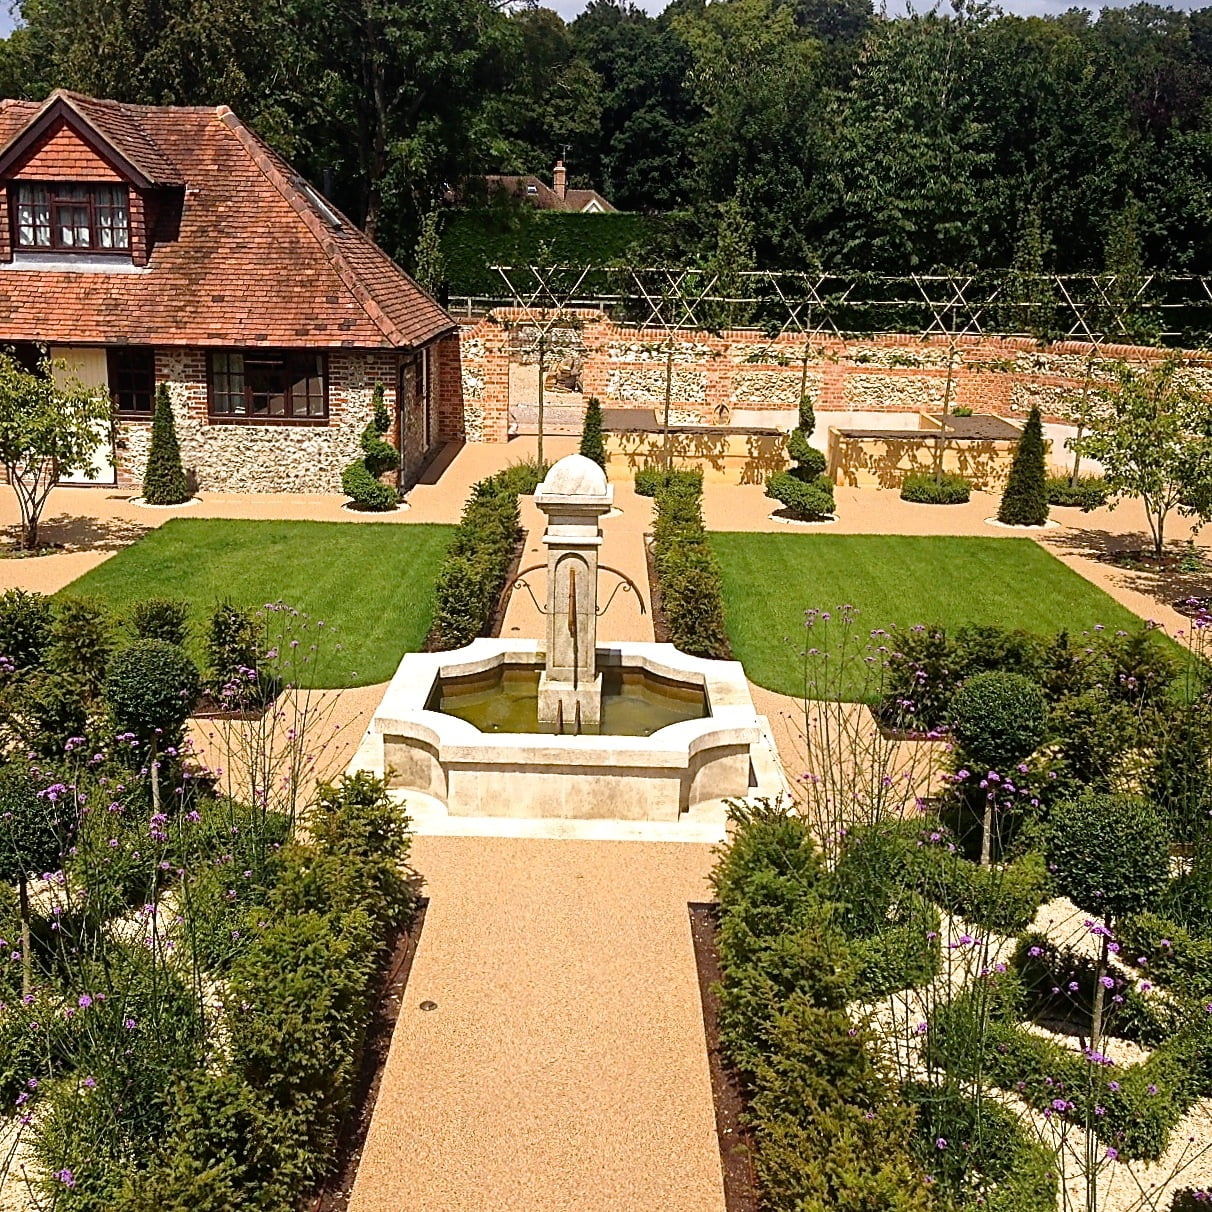 This is the lovely French style walled garden I designed for my clients near Henley on Thames. It has an original French stone fountain similar to those seen all over French public spaces